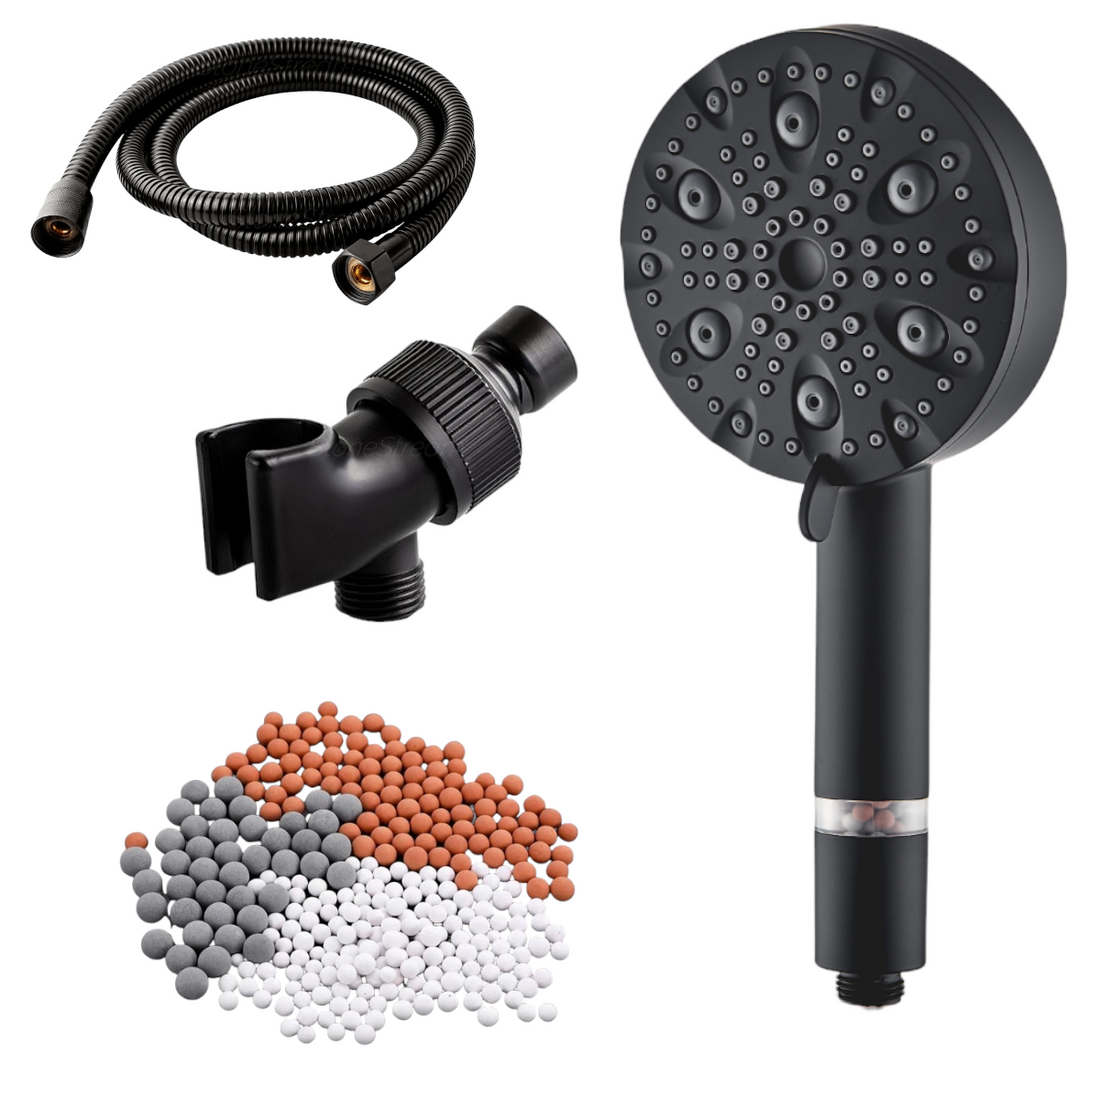 EcoLux 9-mode Black Stainless Steel Shower Head + Wall Adapter Kit